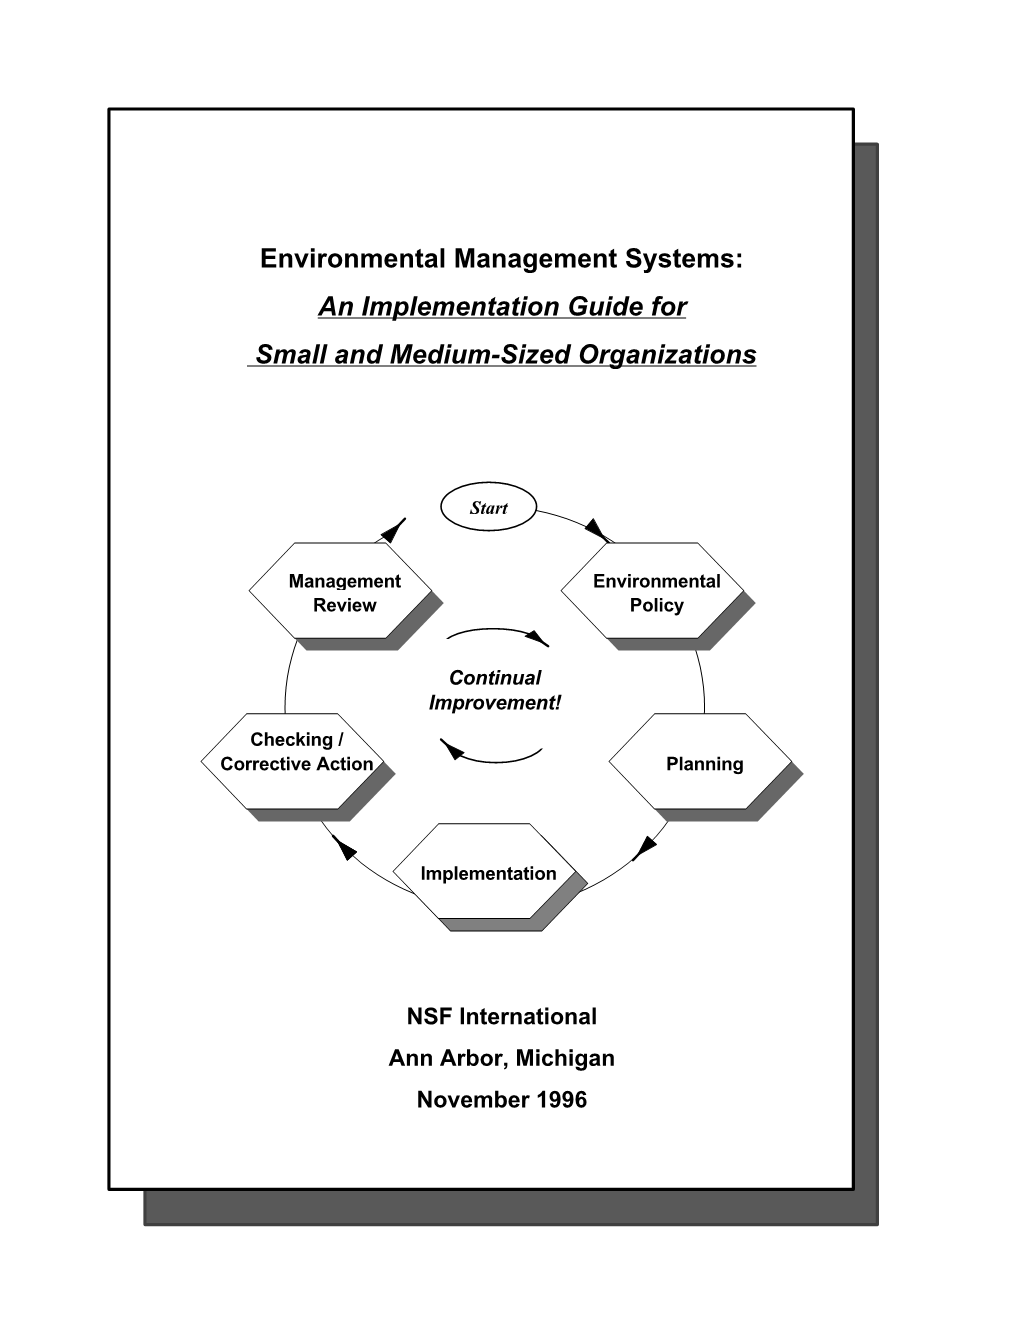 Environmental Management Systems: an Implementation Guide for Small and Medium-Sized Organizations